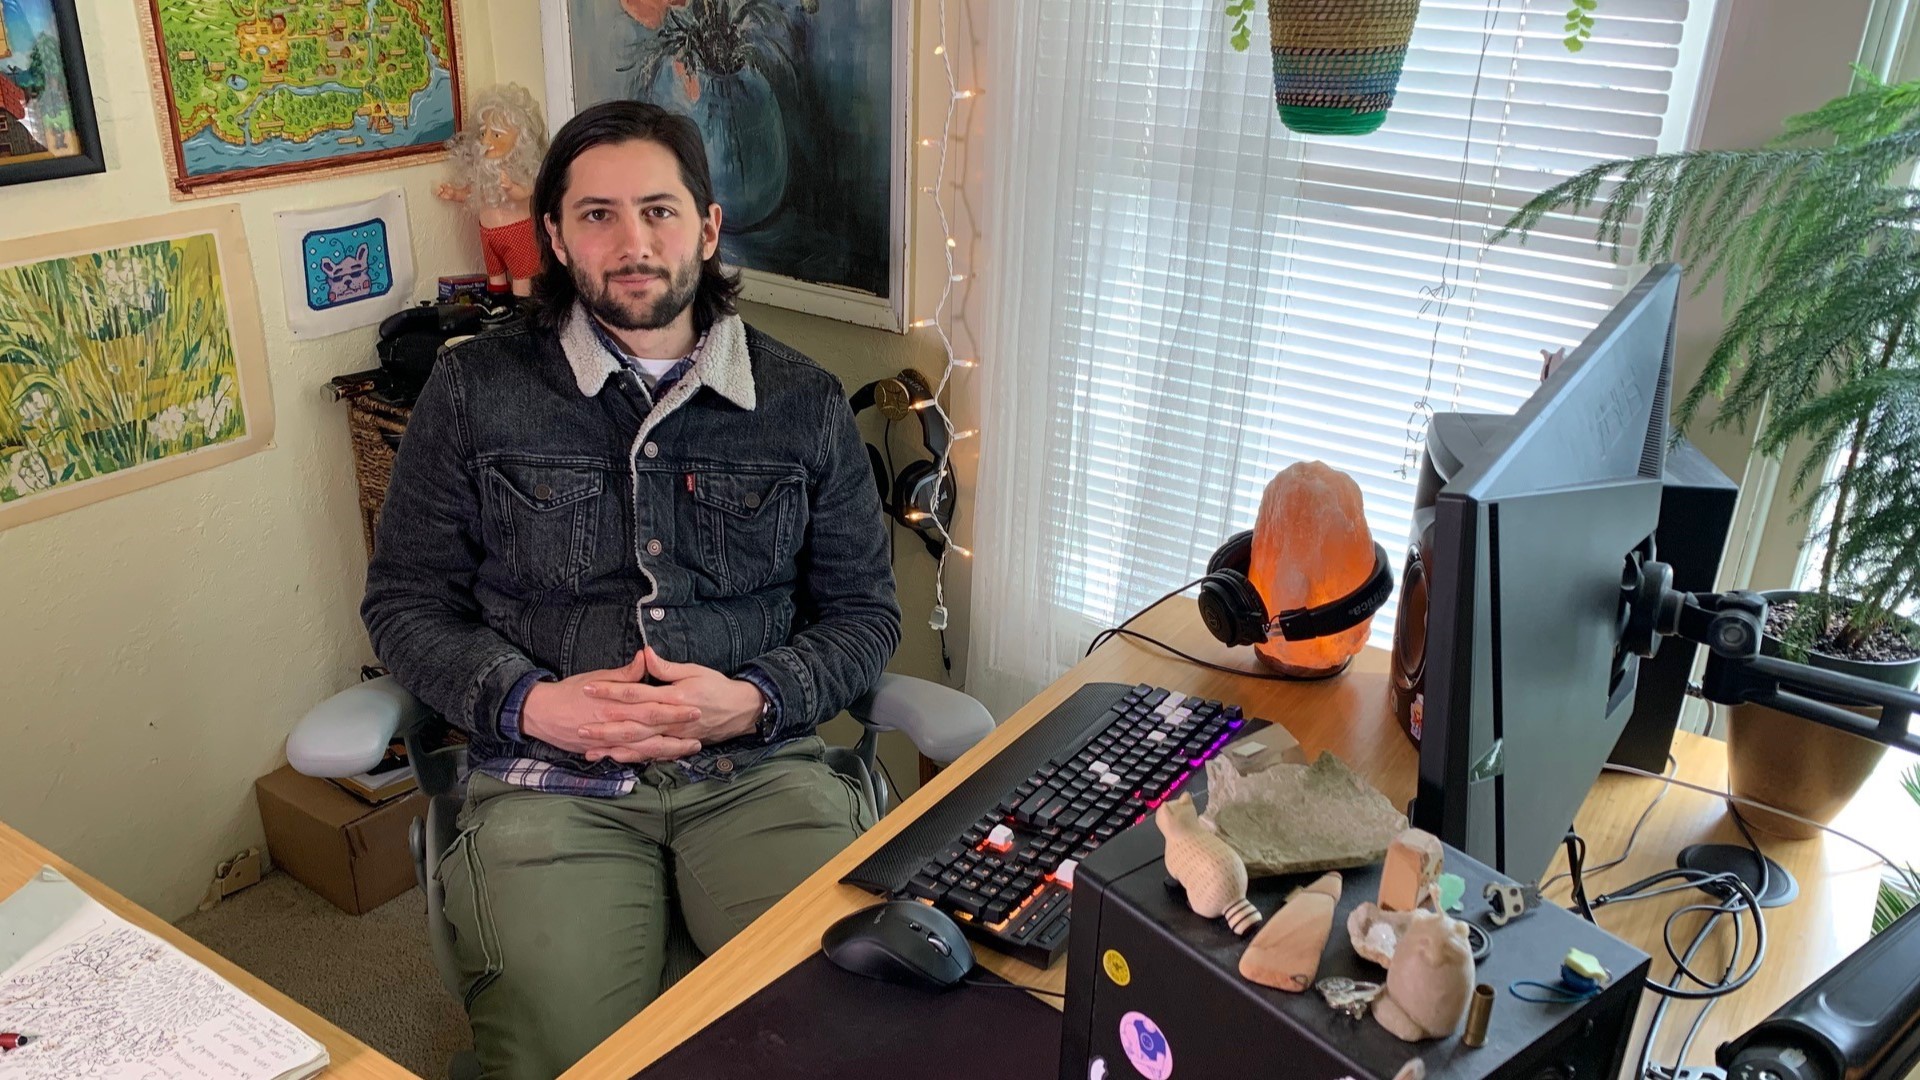 Eric Barone thought his video game, Stardew Valley, was just a resume builder. But this farm simulator game turned into something so much bigger.